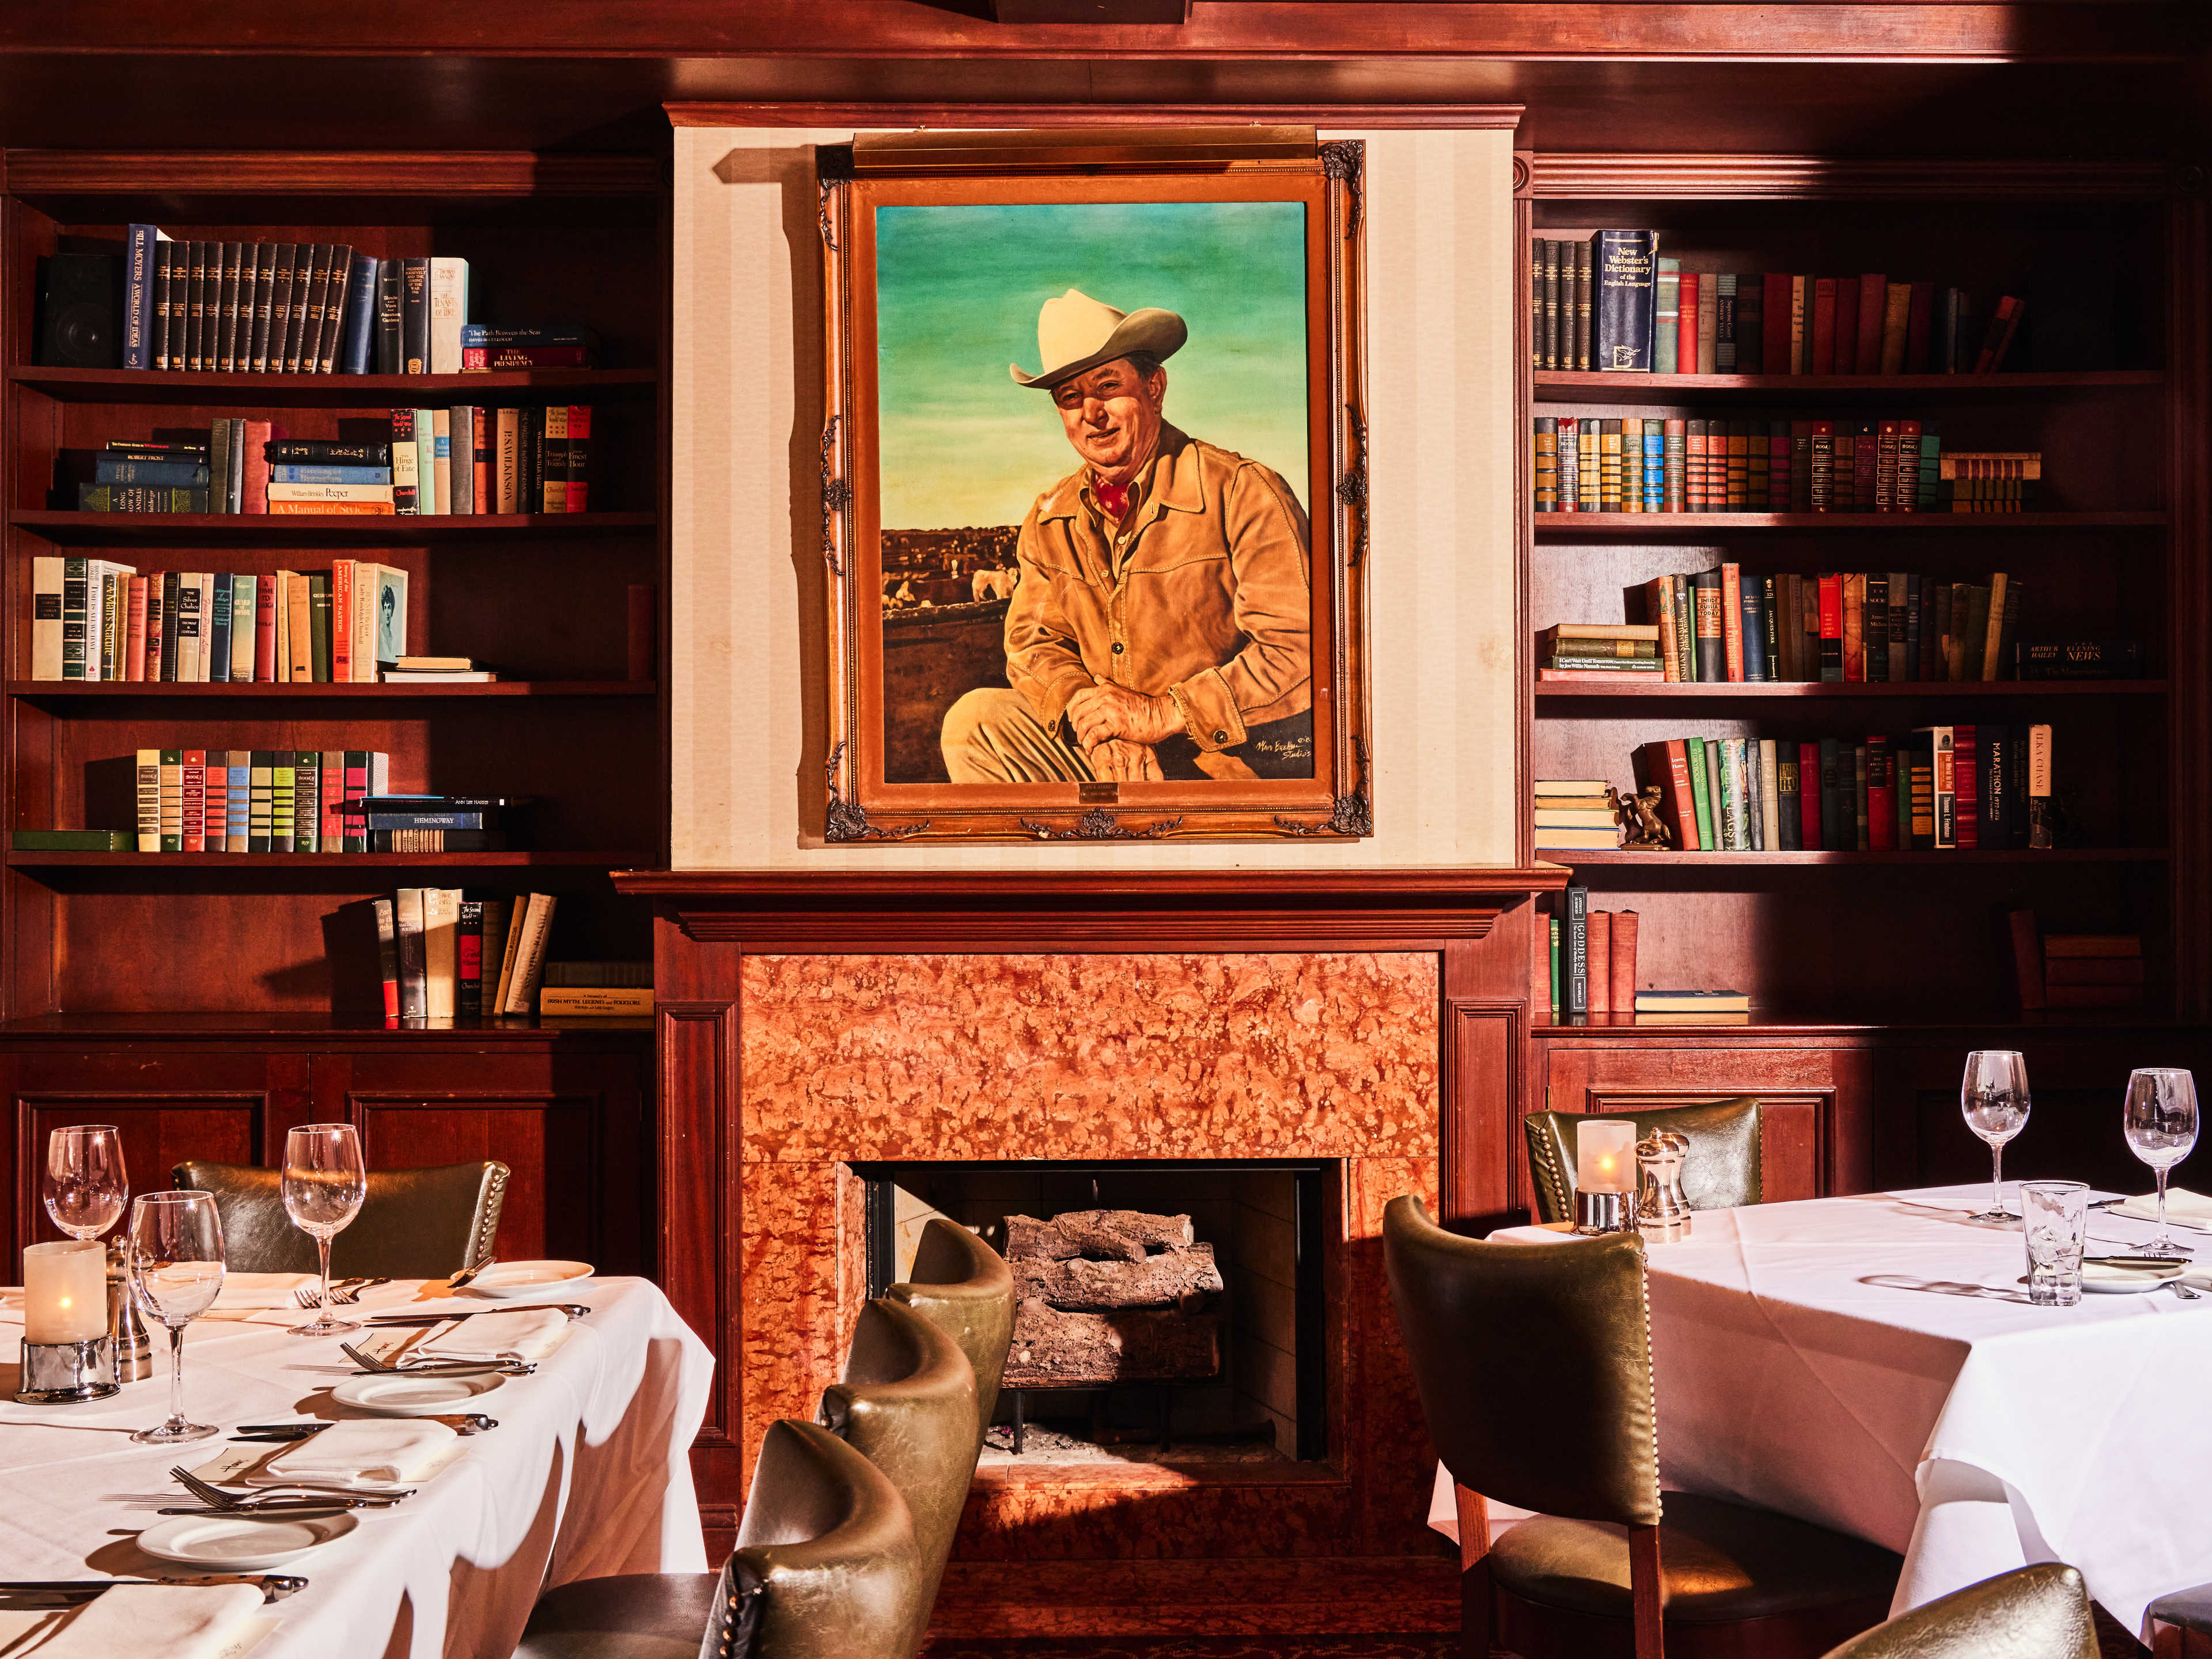 The interior dining room with bookshelves and a fireplace at Harris' Restaurant